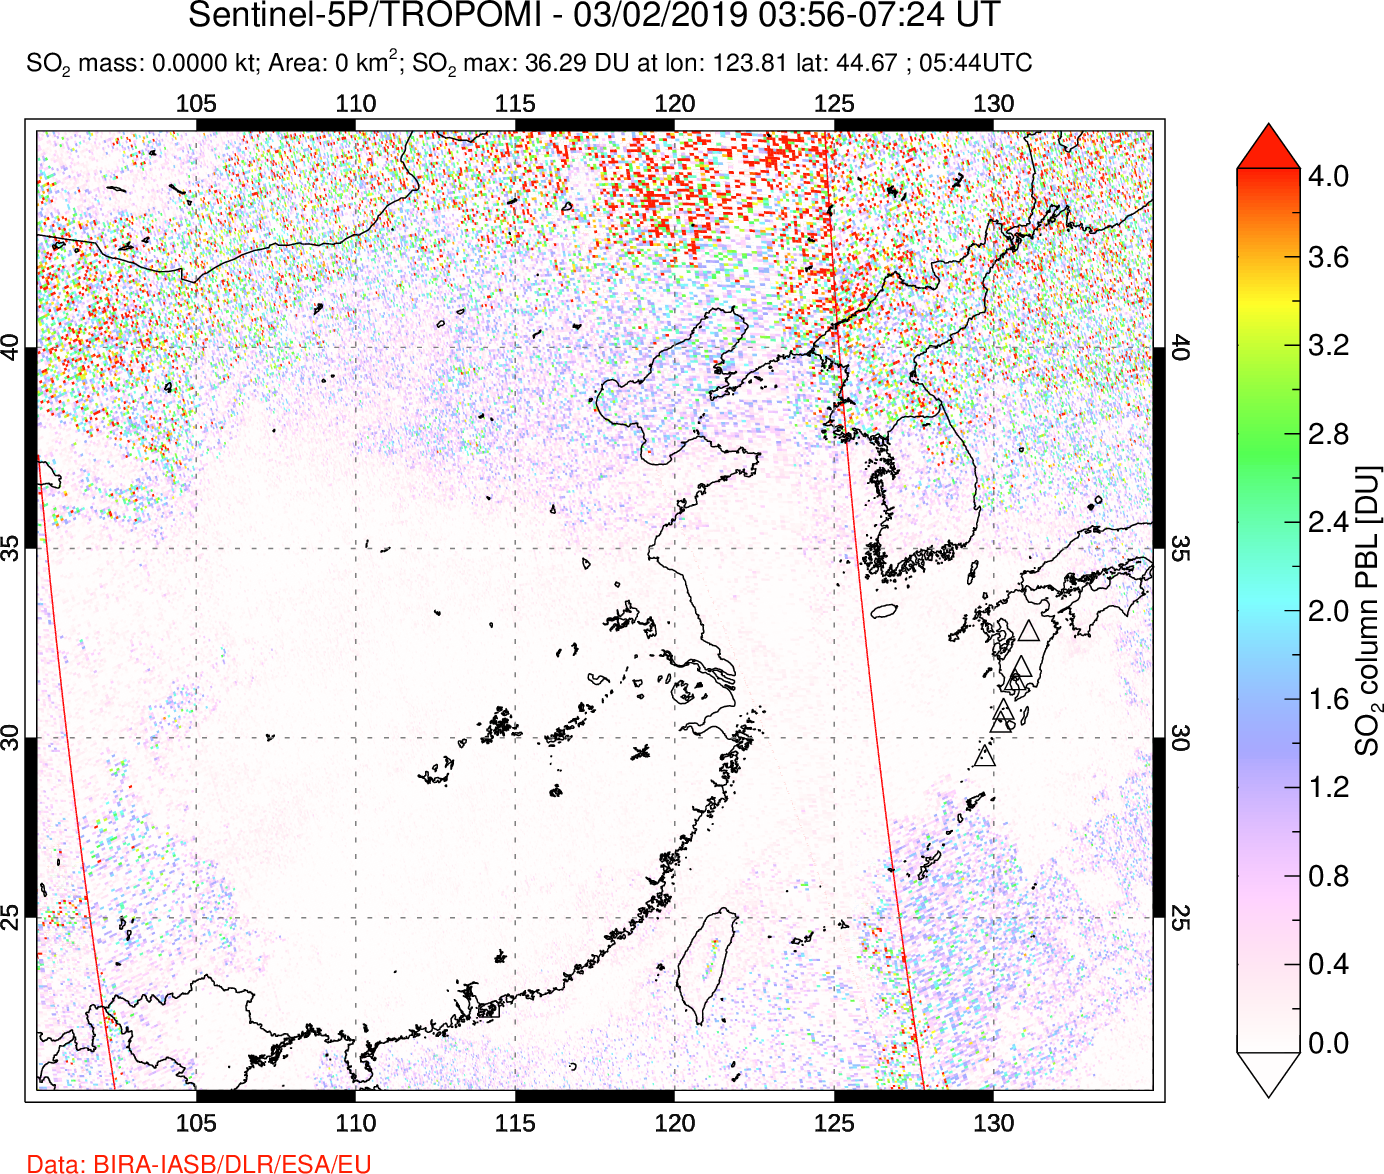 A sulfur dioxide image over Eastern China on Mar 02, 2019.